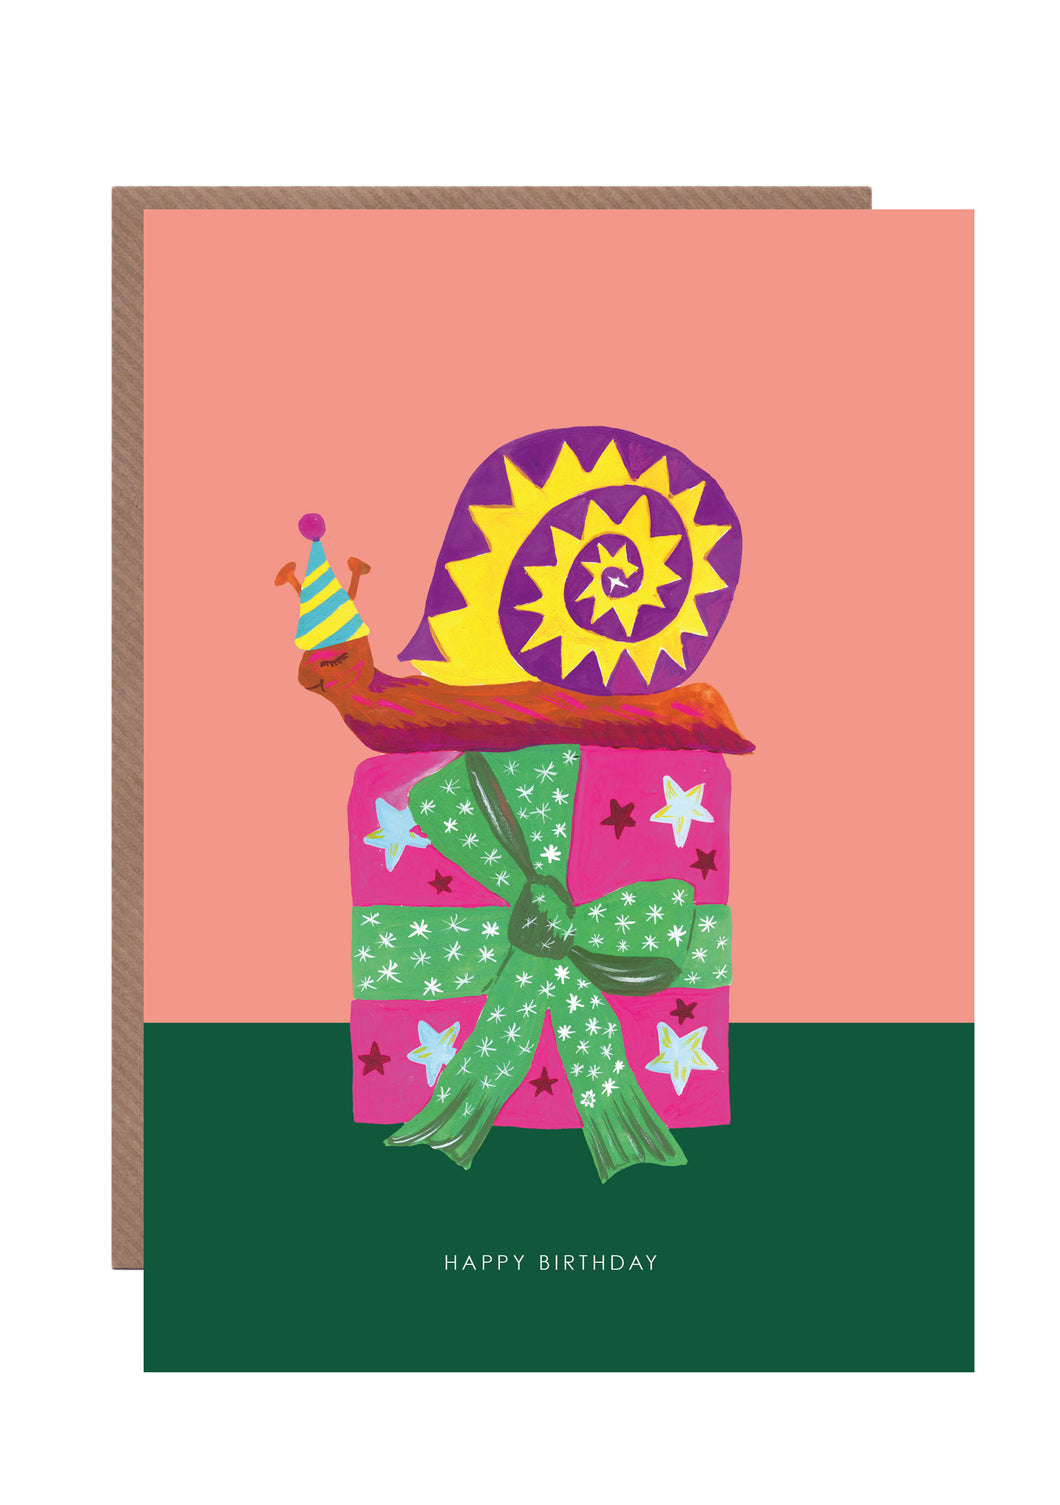 Snail and Present Birthday Greetings Card